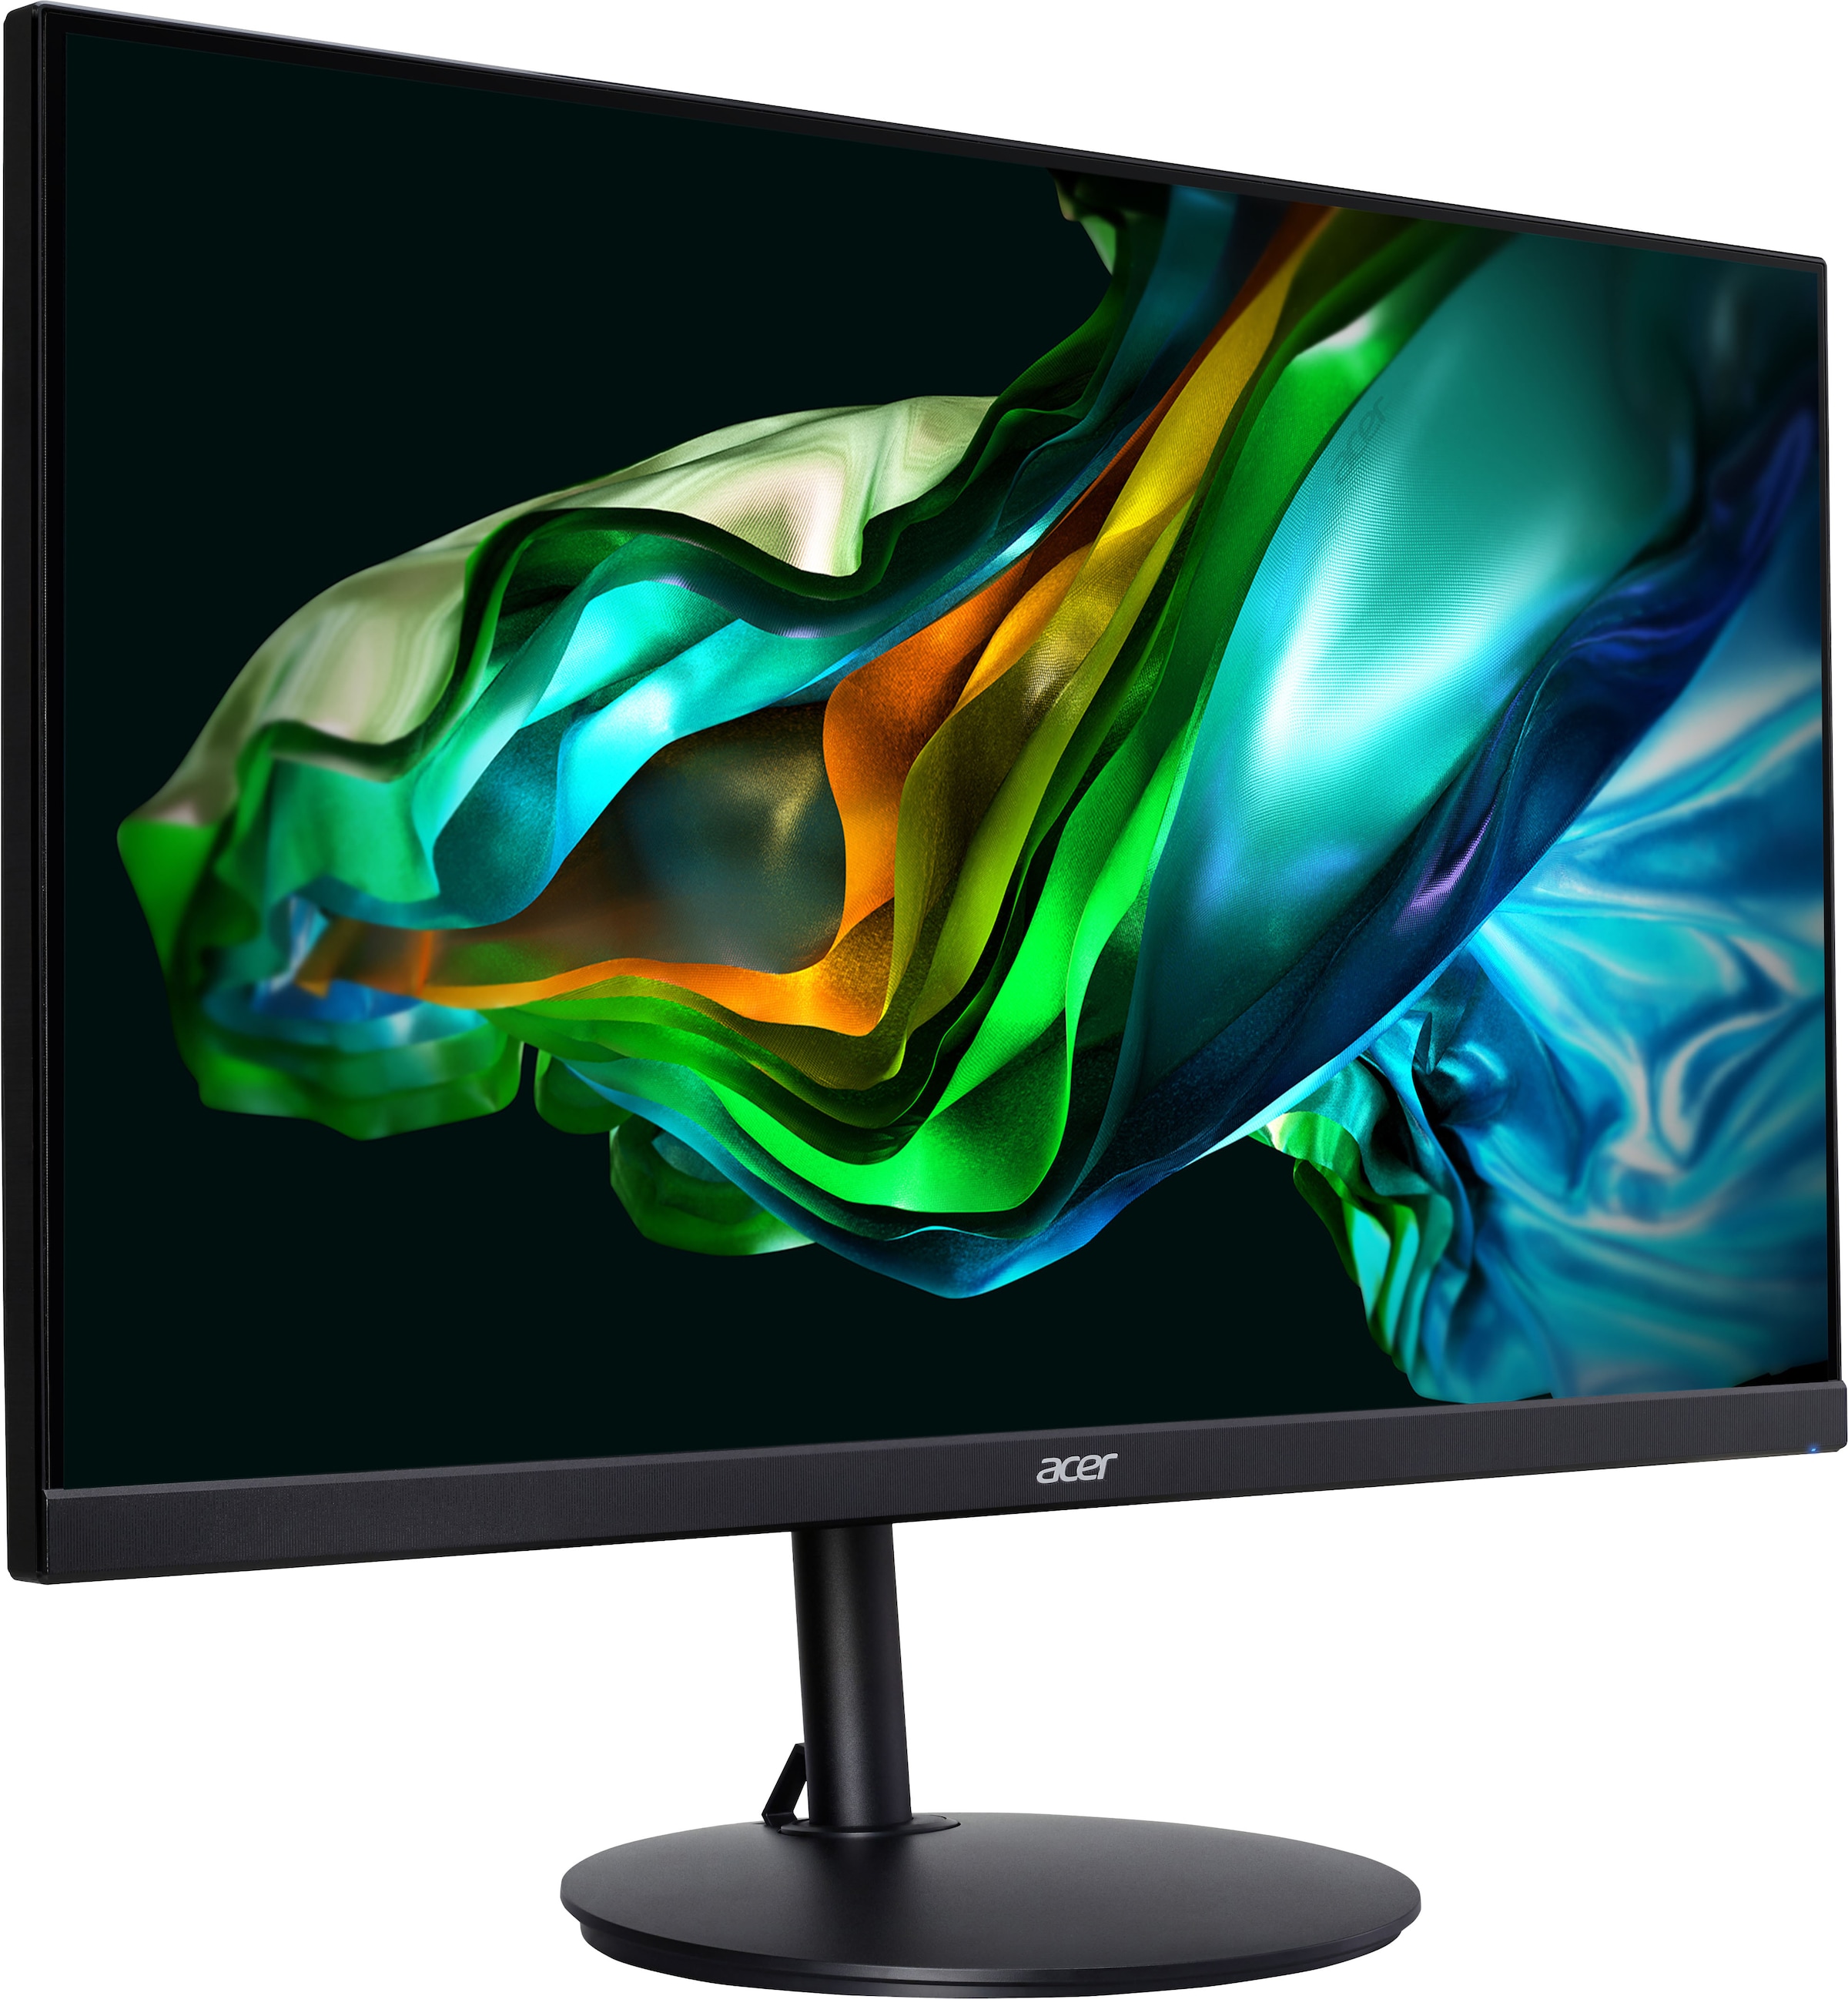 Acer LED-Monitor »CB272E«, 69 cm/27 Zoll, 1920 x 1080 px, Full HD, 4 ms Reaktionszeit, 100 Hz